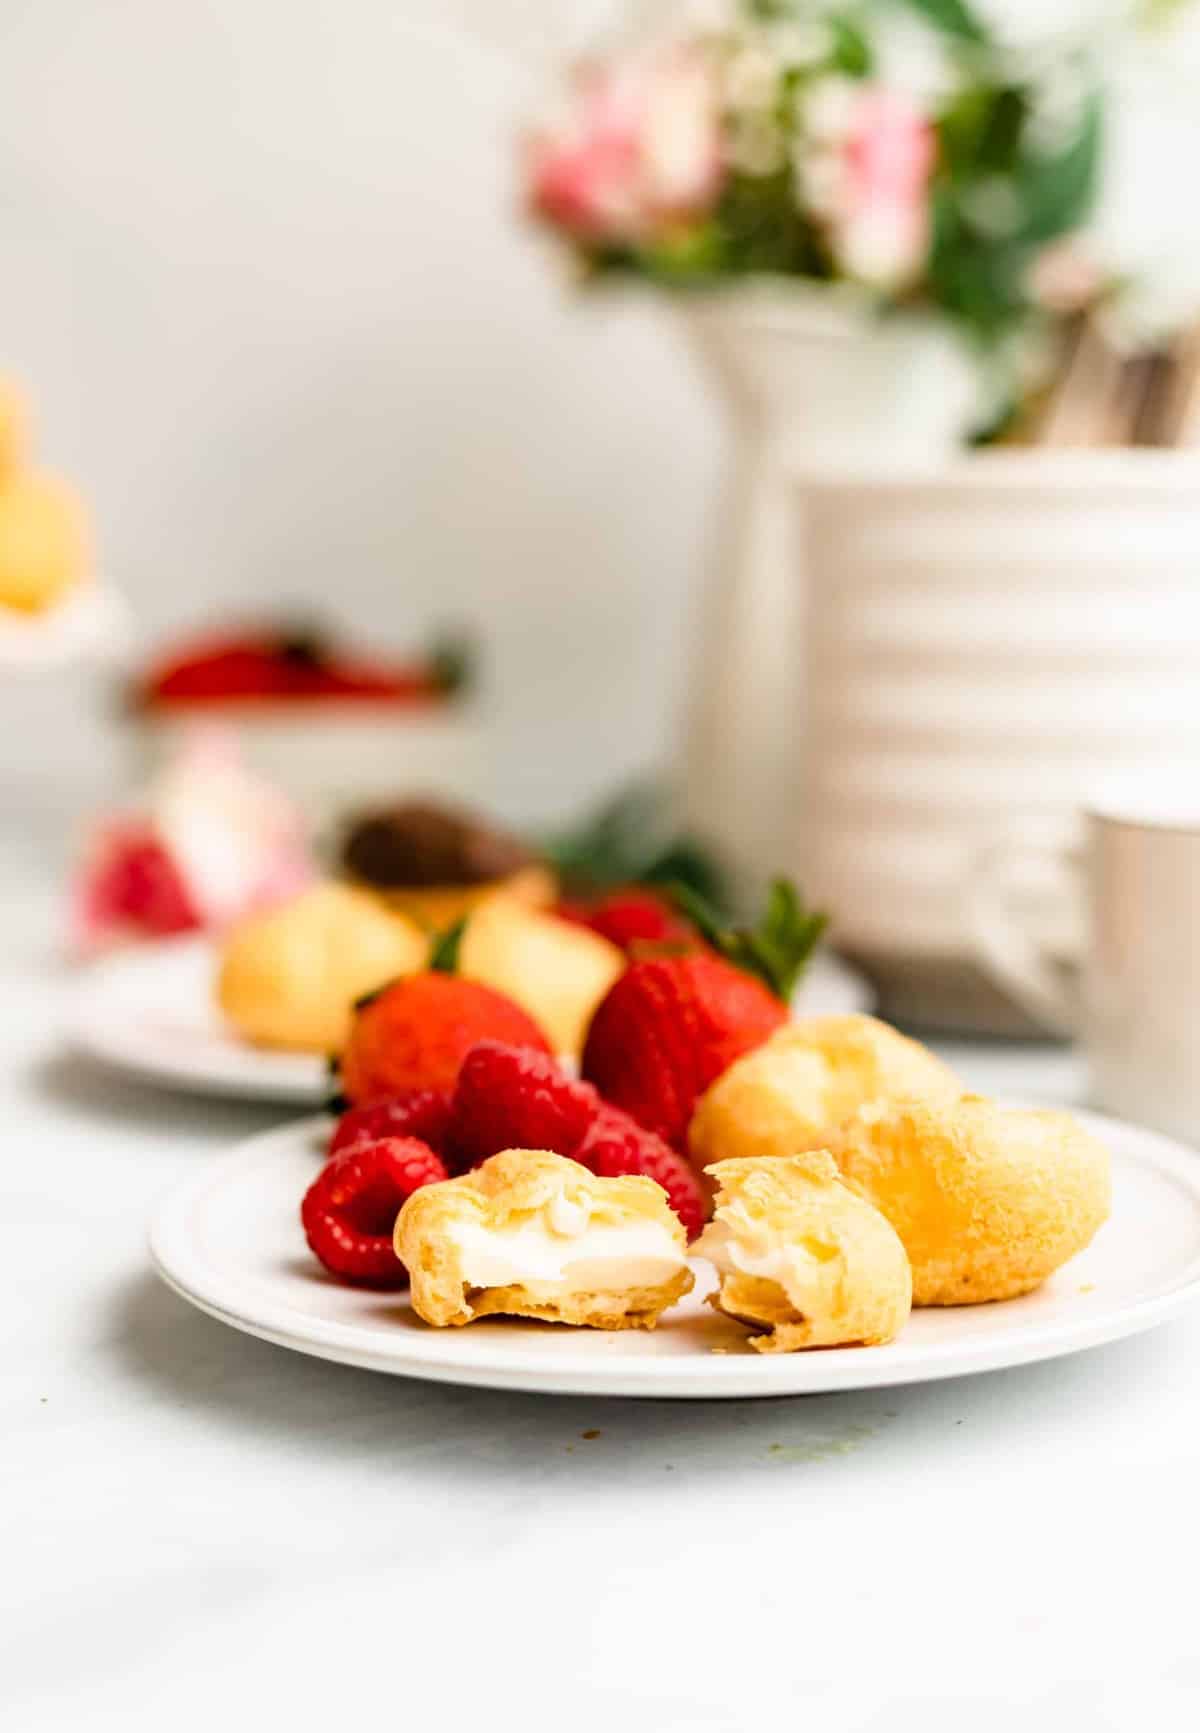 How to Host a Stress-Free Spring Brunch